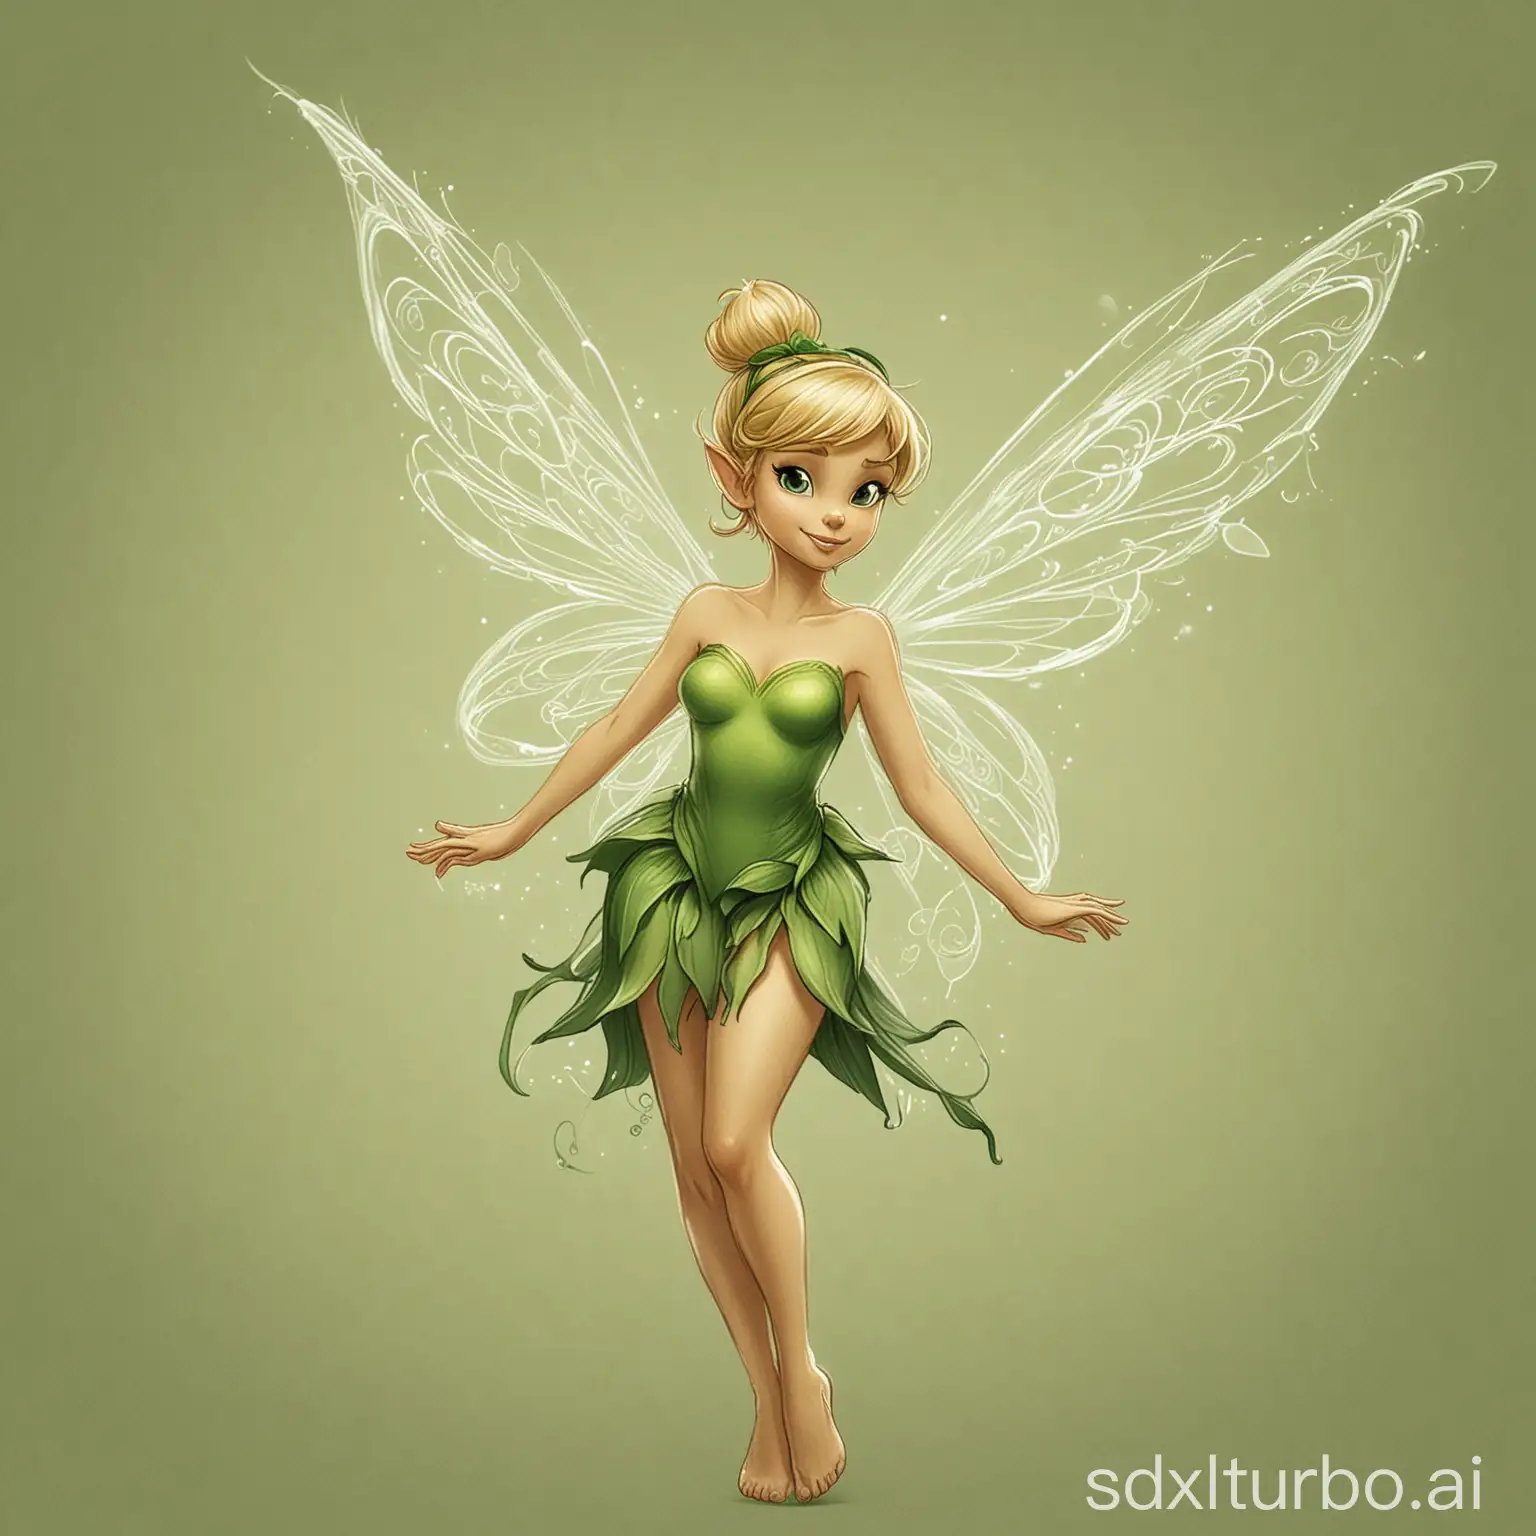 I want a drawing of Tinkerbell, dressed in green, with her wings, arms crossed, standing, with a raw color background and a flourish in the background